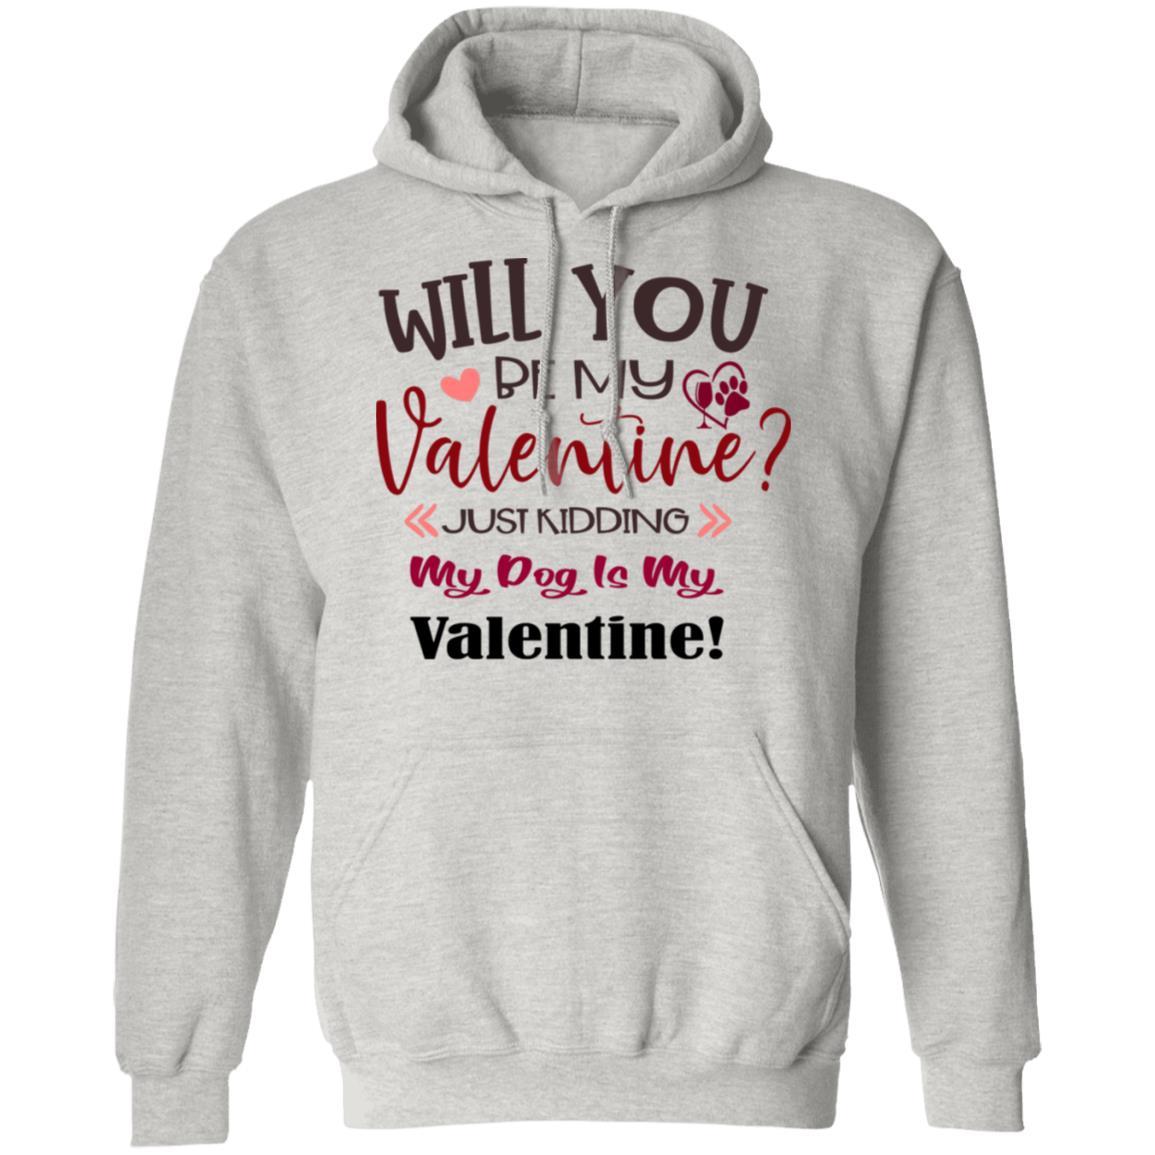 Sweatshirts Ash / S Winey Bitches Co "Will You Be My Valentine" Pullover Hoodie 8 oz. WineyBitchesCo